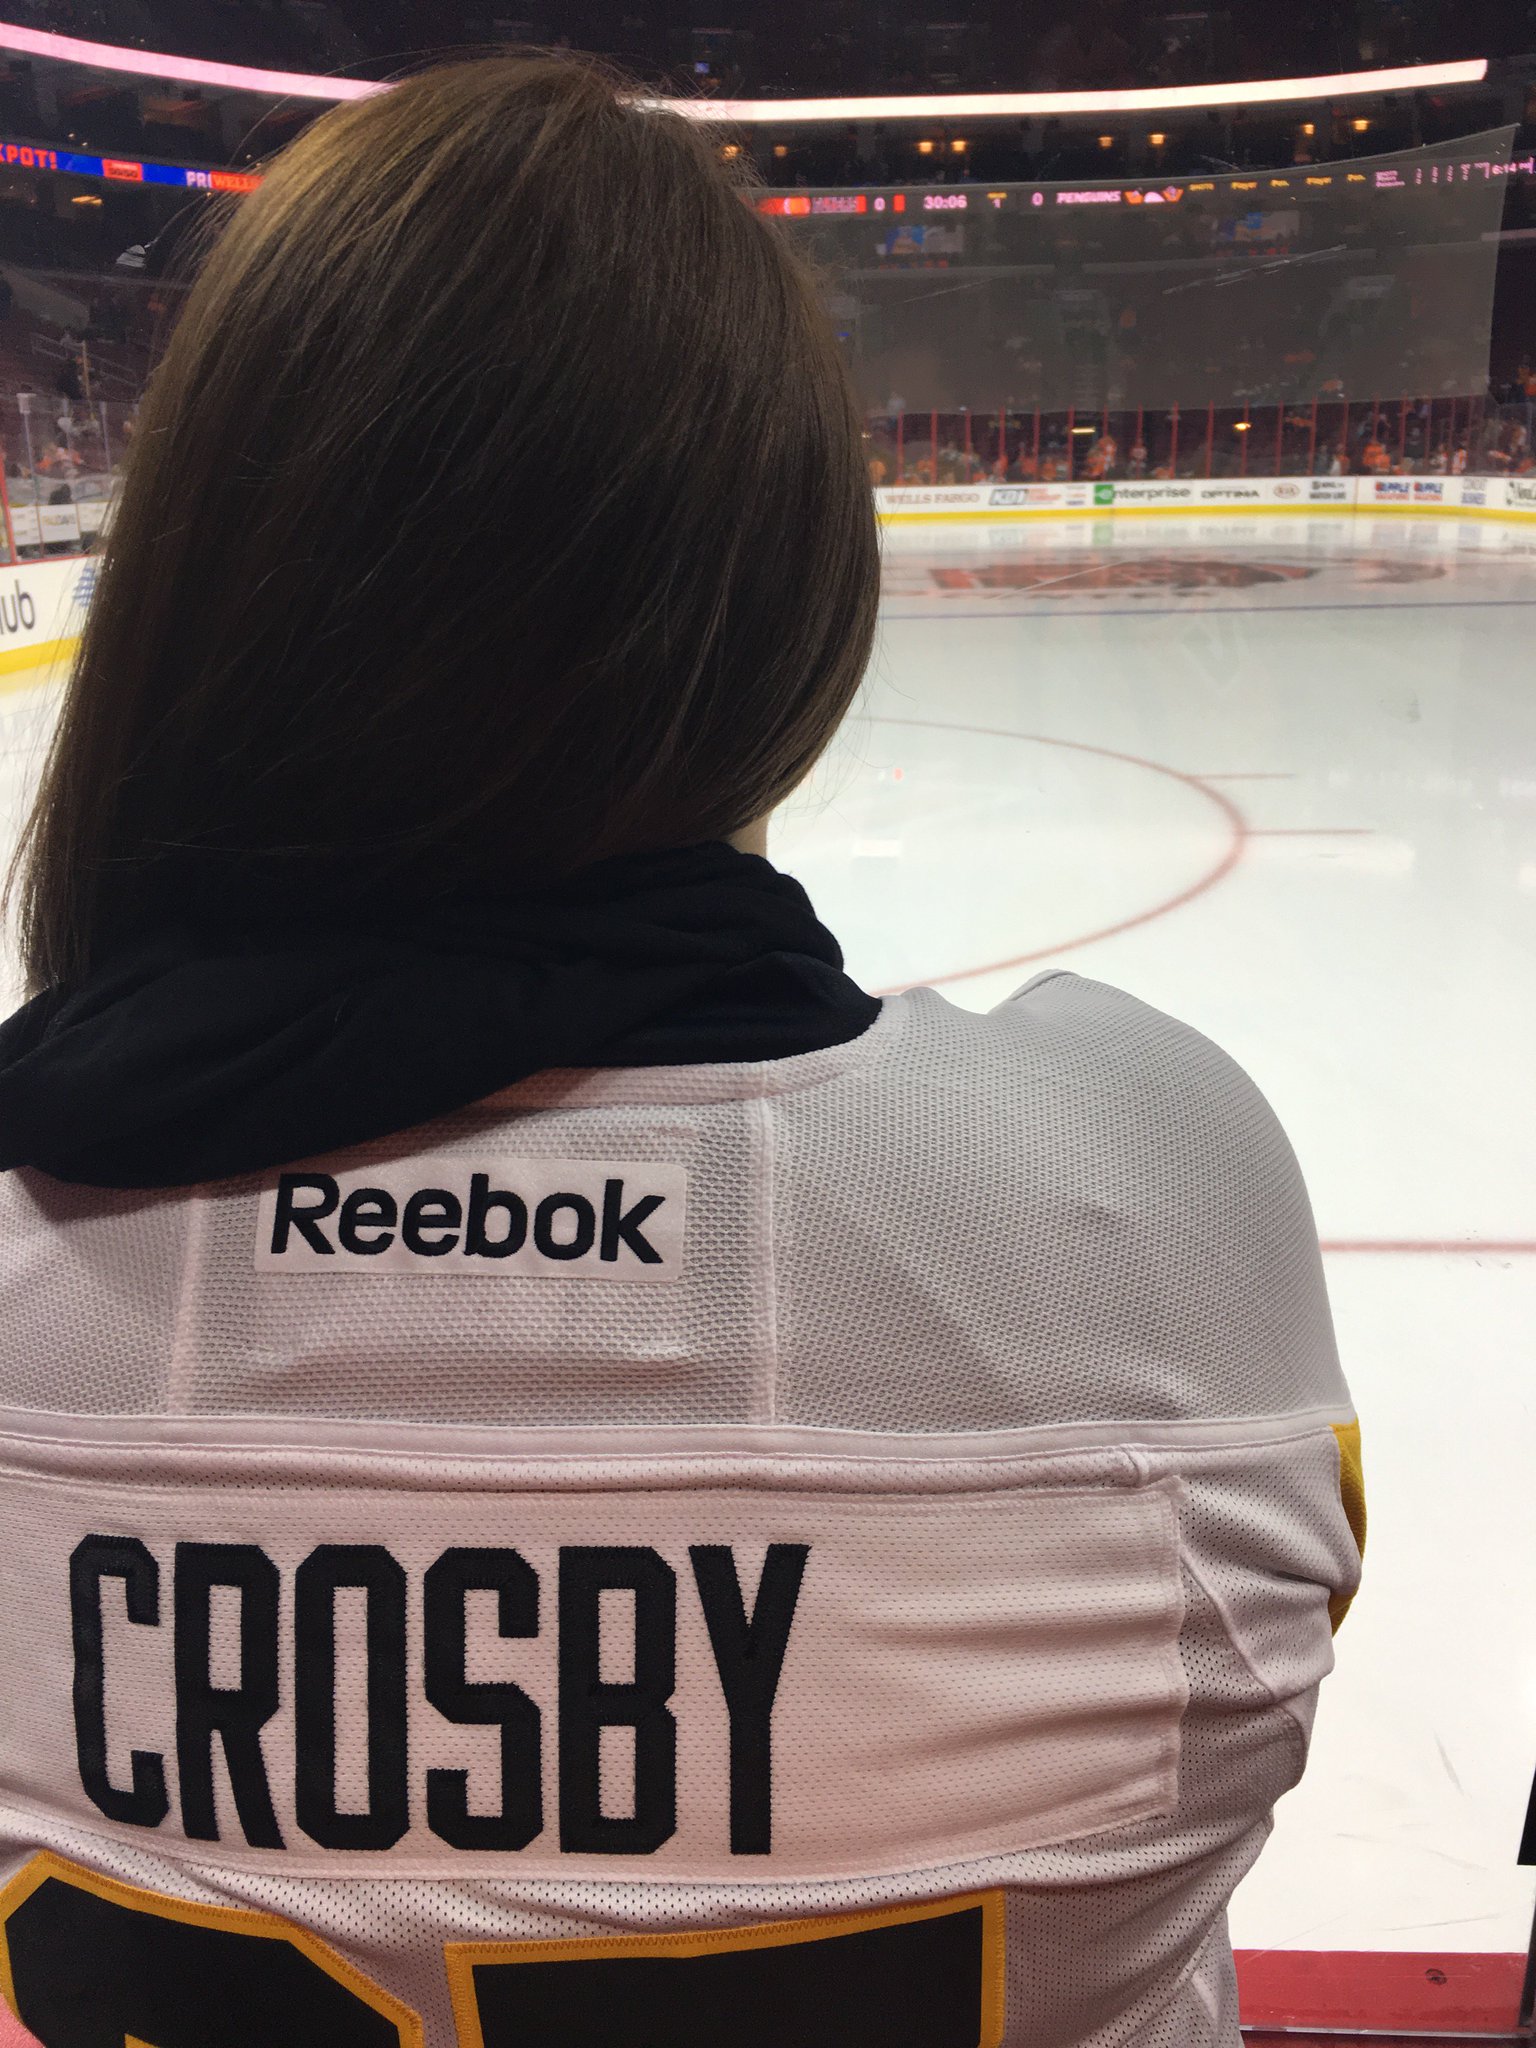 I wrote about how Sidney Crosby changed& saved my life 3 yrs ago on 